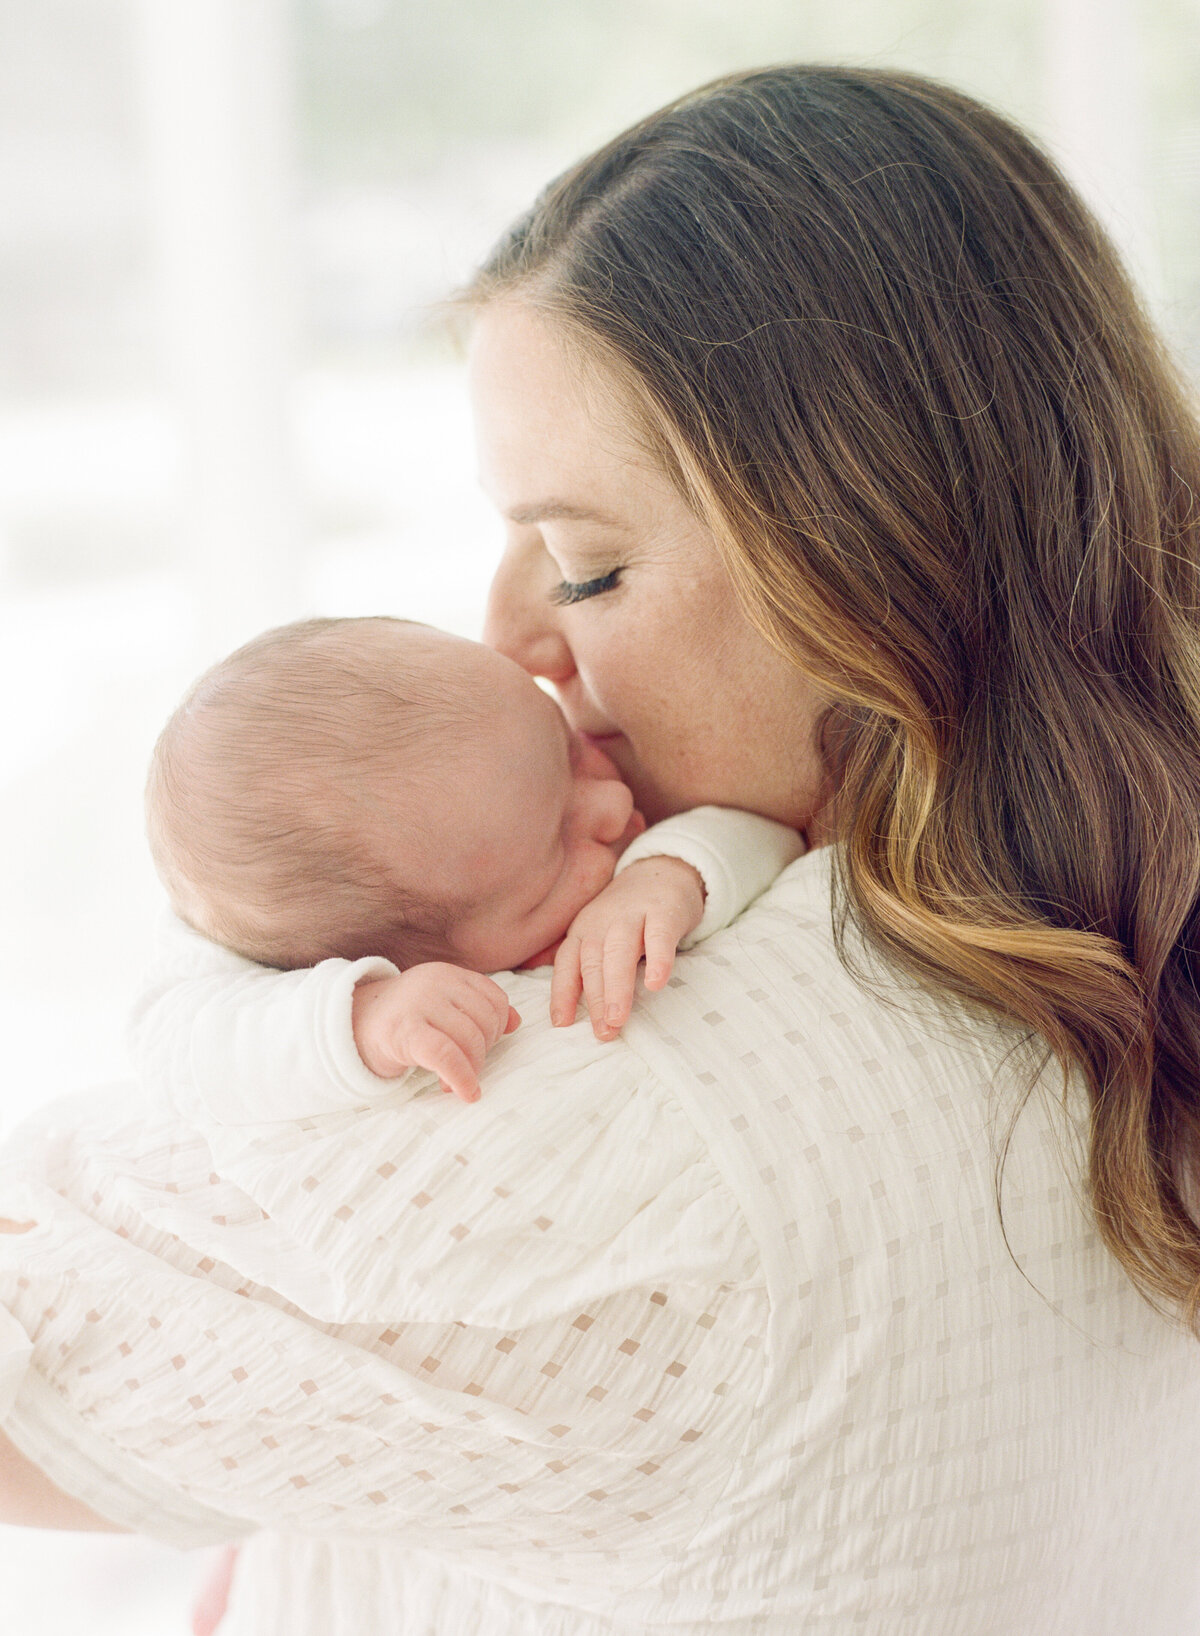 Mom kisses baby on the cheek while he lays asleep on her shoulder during their Raleigh newborn photography session. Photographed by Raleigh newborn photographer A.J. Dunlap Photography.